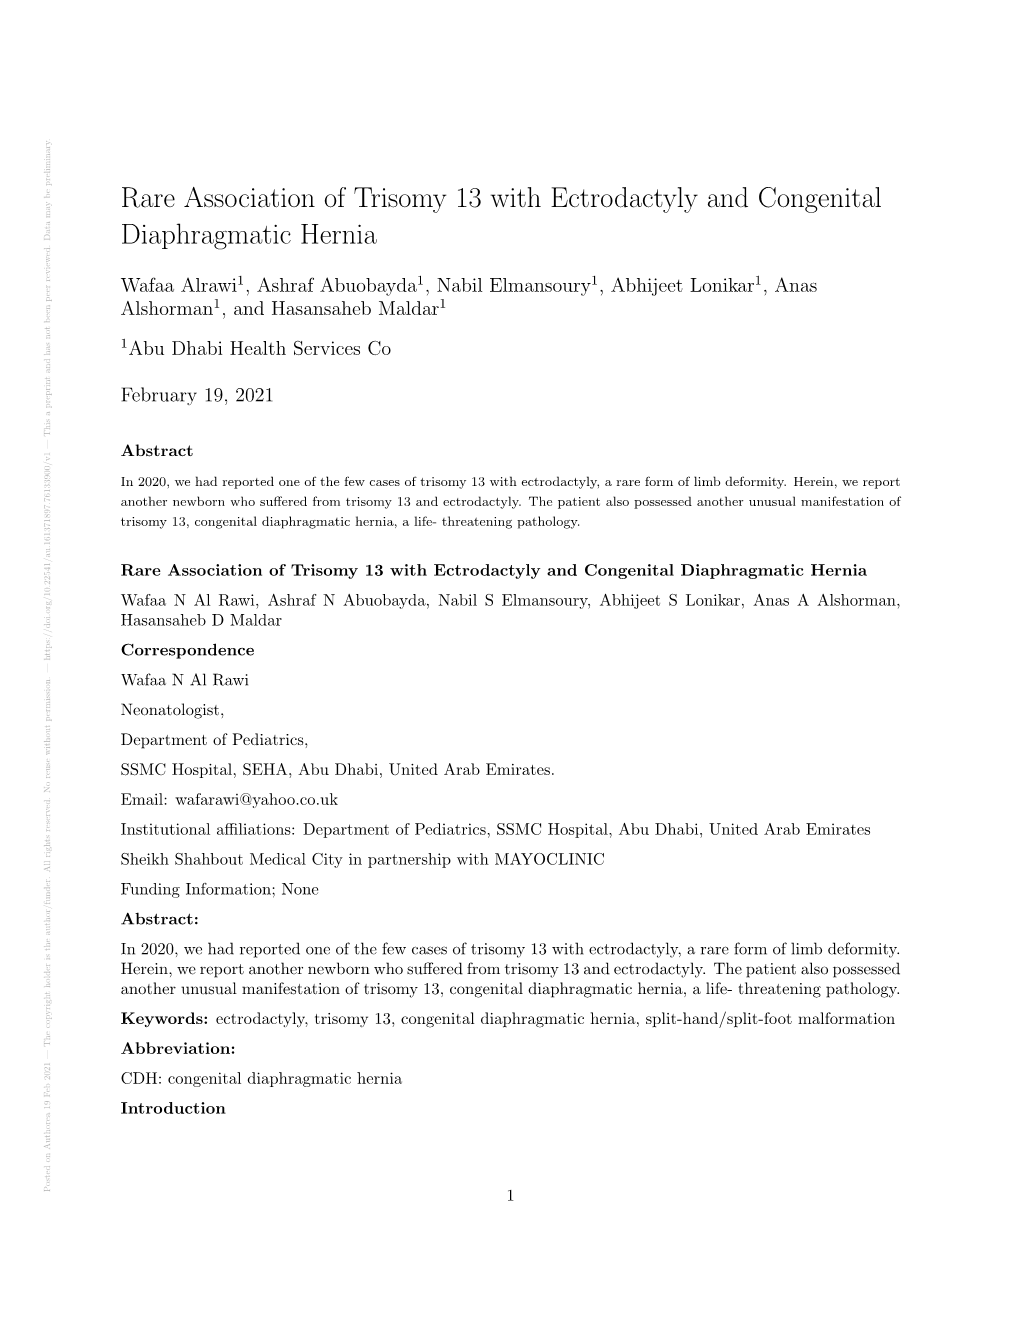 Rare Association of Trisomy 13 with Ectrodactyly and Congenital Diaphragmatic Hernia